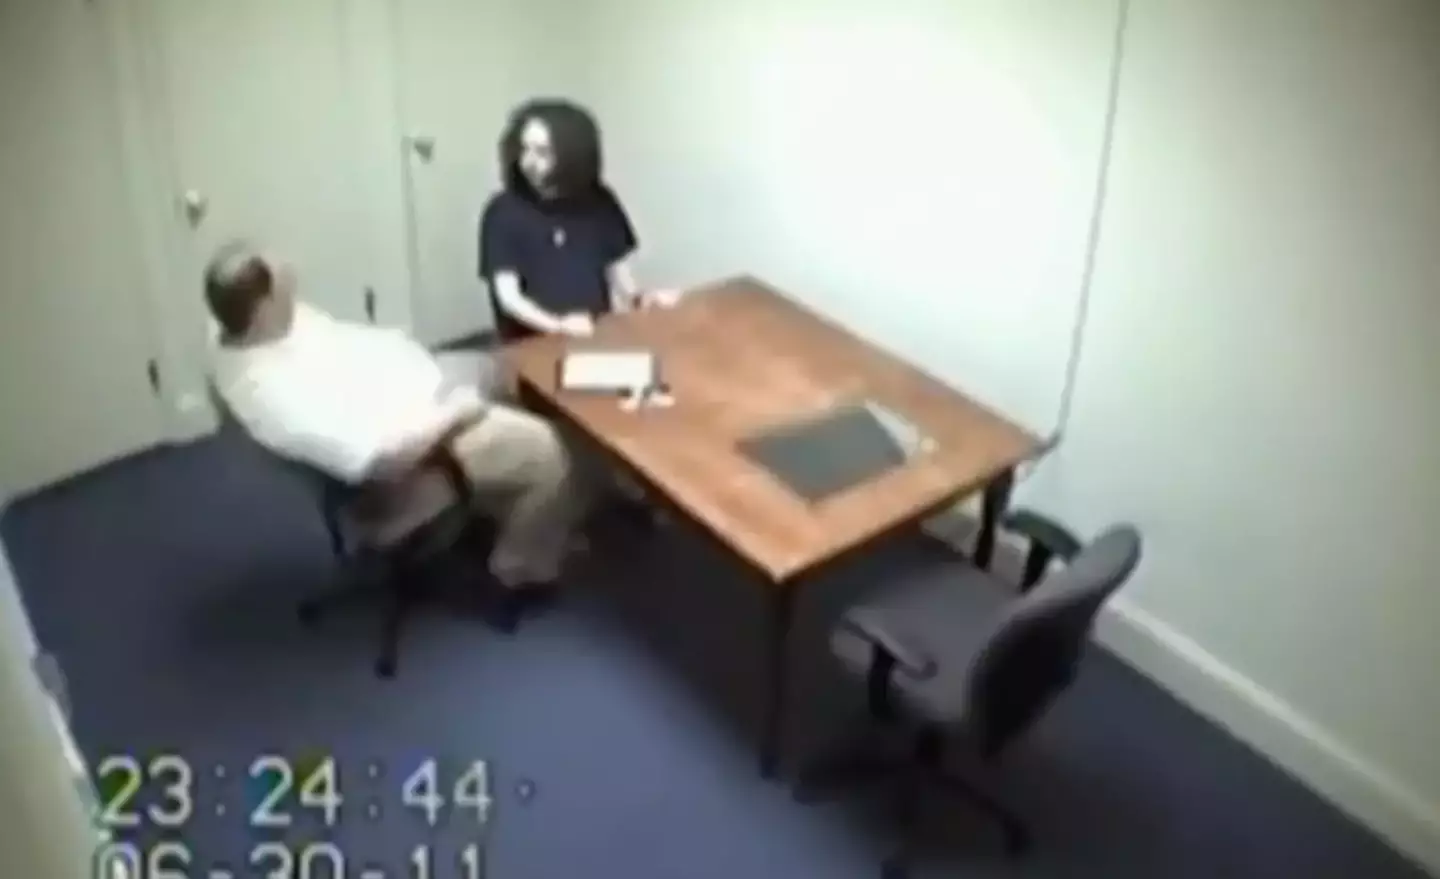 Footage from McDaniel's police interrogation is also very creepy.